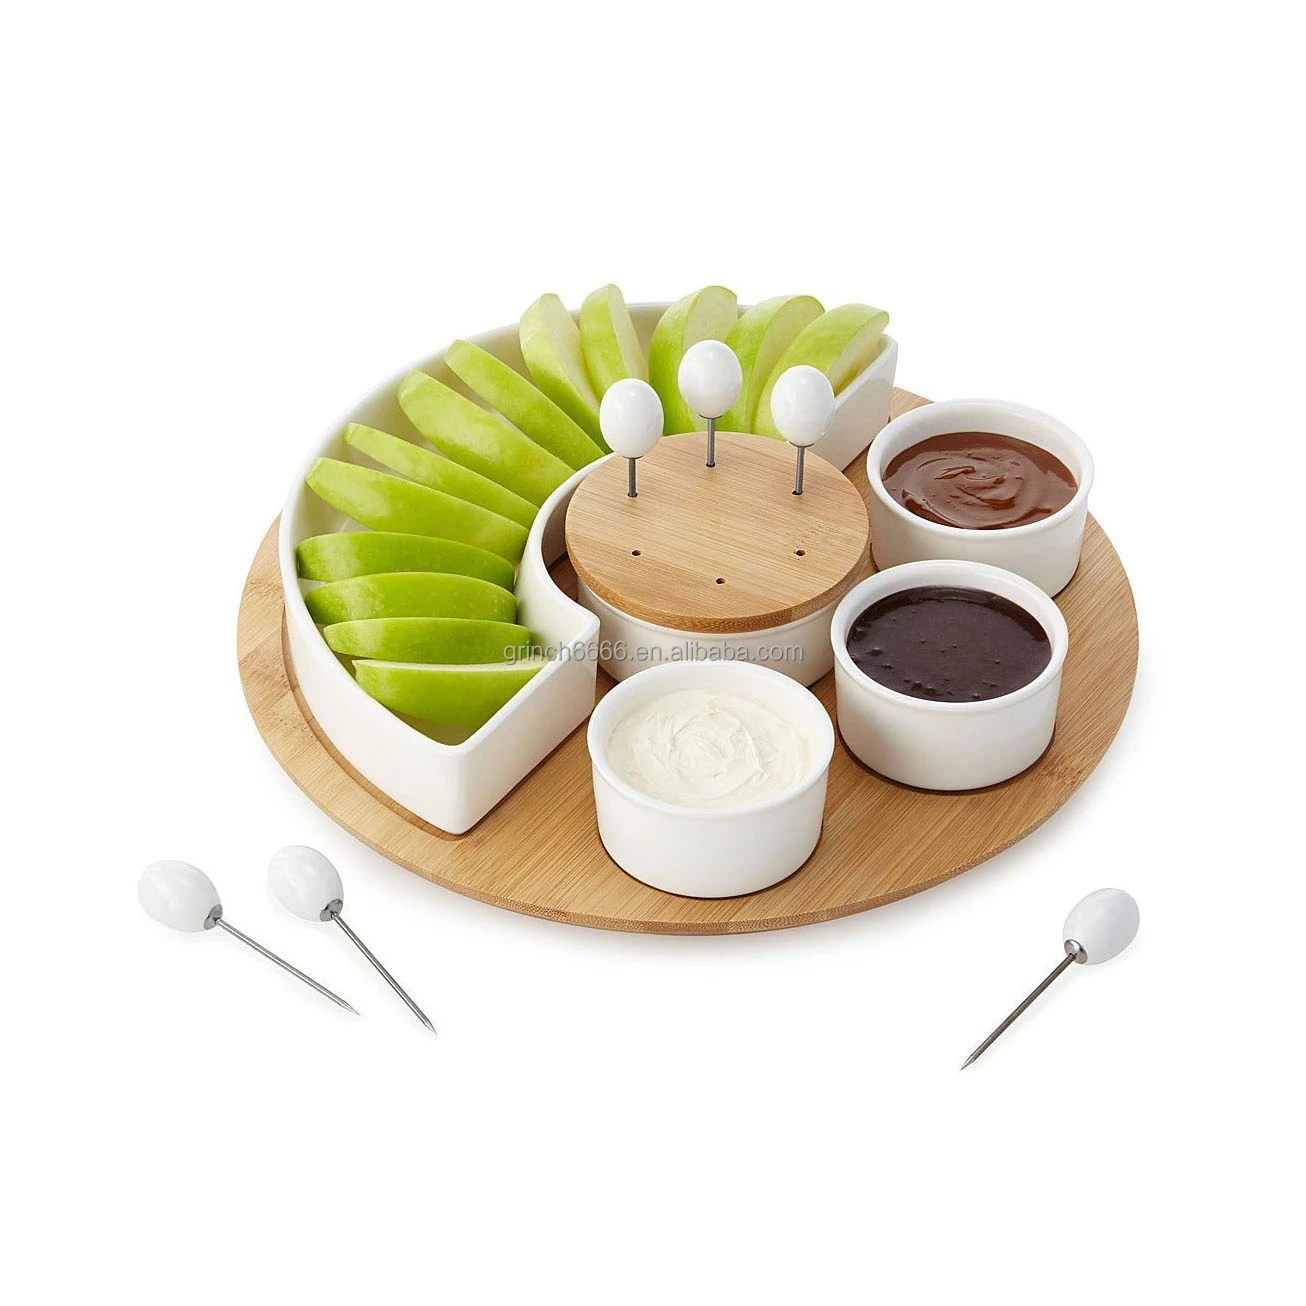 Appetizer Serving Tray Set Bamboo and White Ceramic Chip And Dip Tray Appetizer Serving Platters